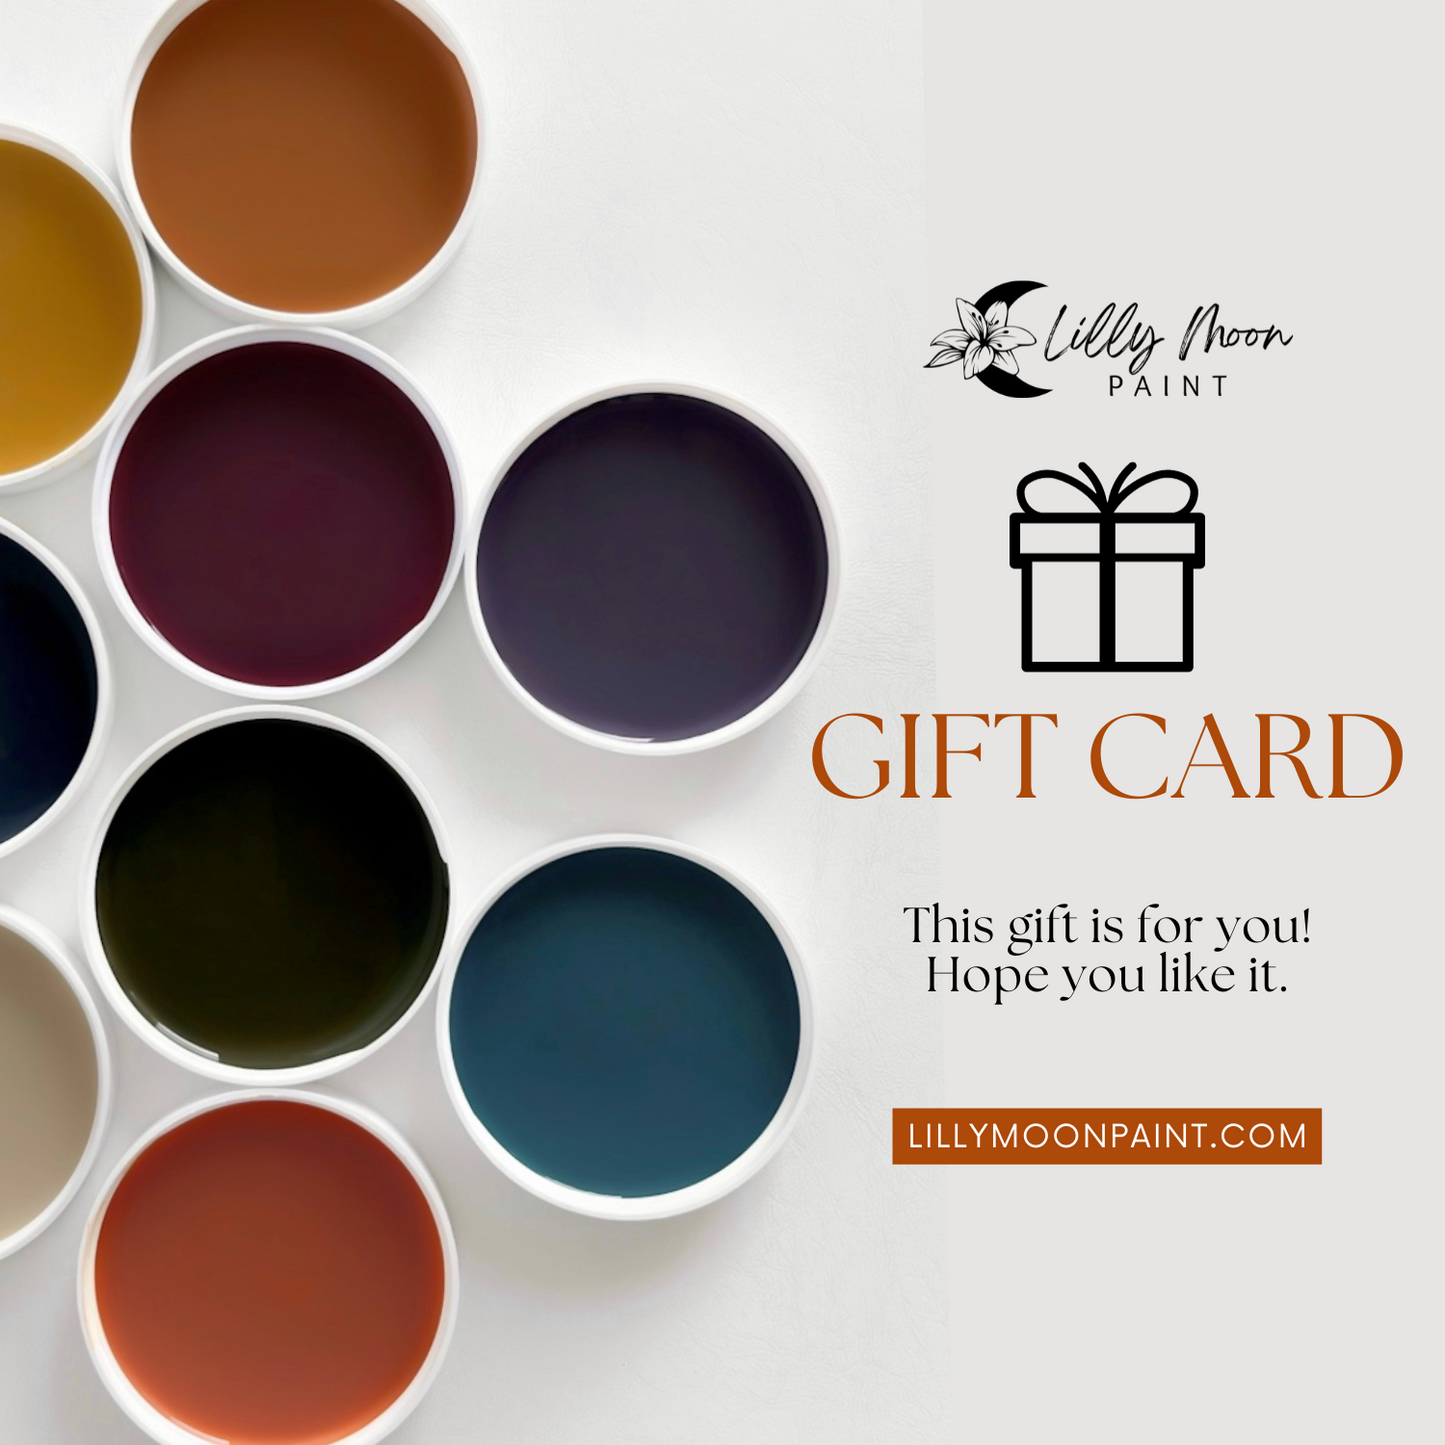 Lilly Moon Gift Card